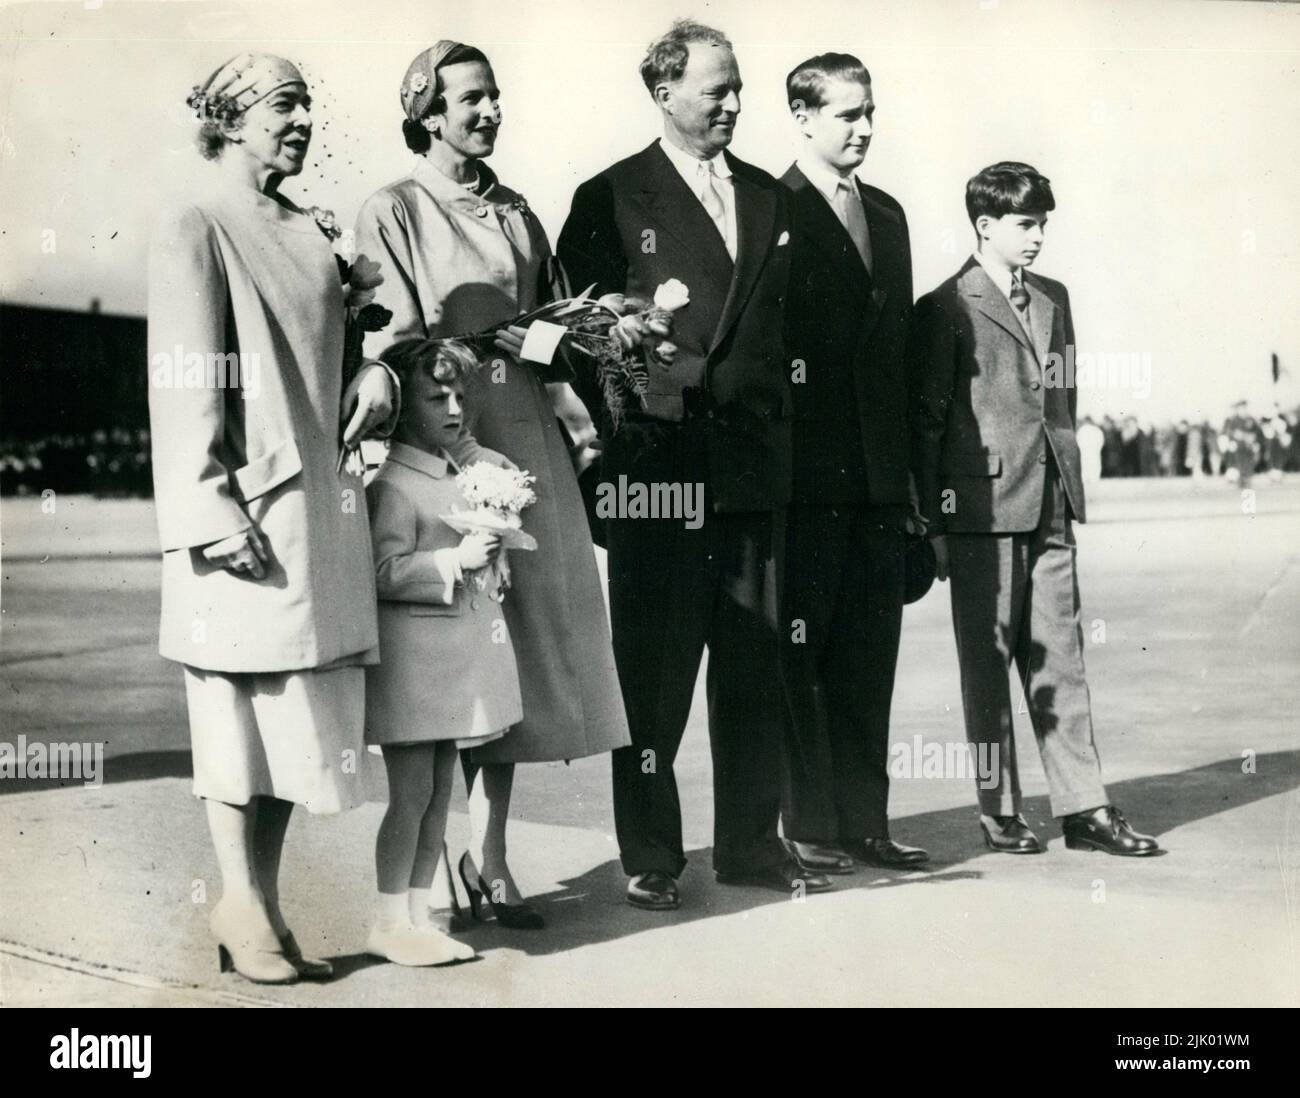 Brussels, Belgium. 05th May, 1955. When the King of the Belgians left Brussels recently for his official visit to the Belgian Congo, he was seen on by members of his family. Watching as the young King's plane leaves are L-R : QUEEN ELISABETH ; PRINCESS MARIE CHRISTINE; PRINCESS OF RATHY; Former KING LEOPOLD; PRINCE ALBERT and PRINCE ALEXANDER. Credit: Keystone Press Agency/ZUMA Wire/Alamy Live News Stock Photo